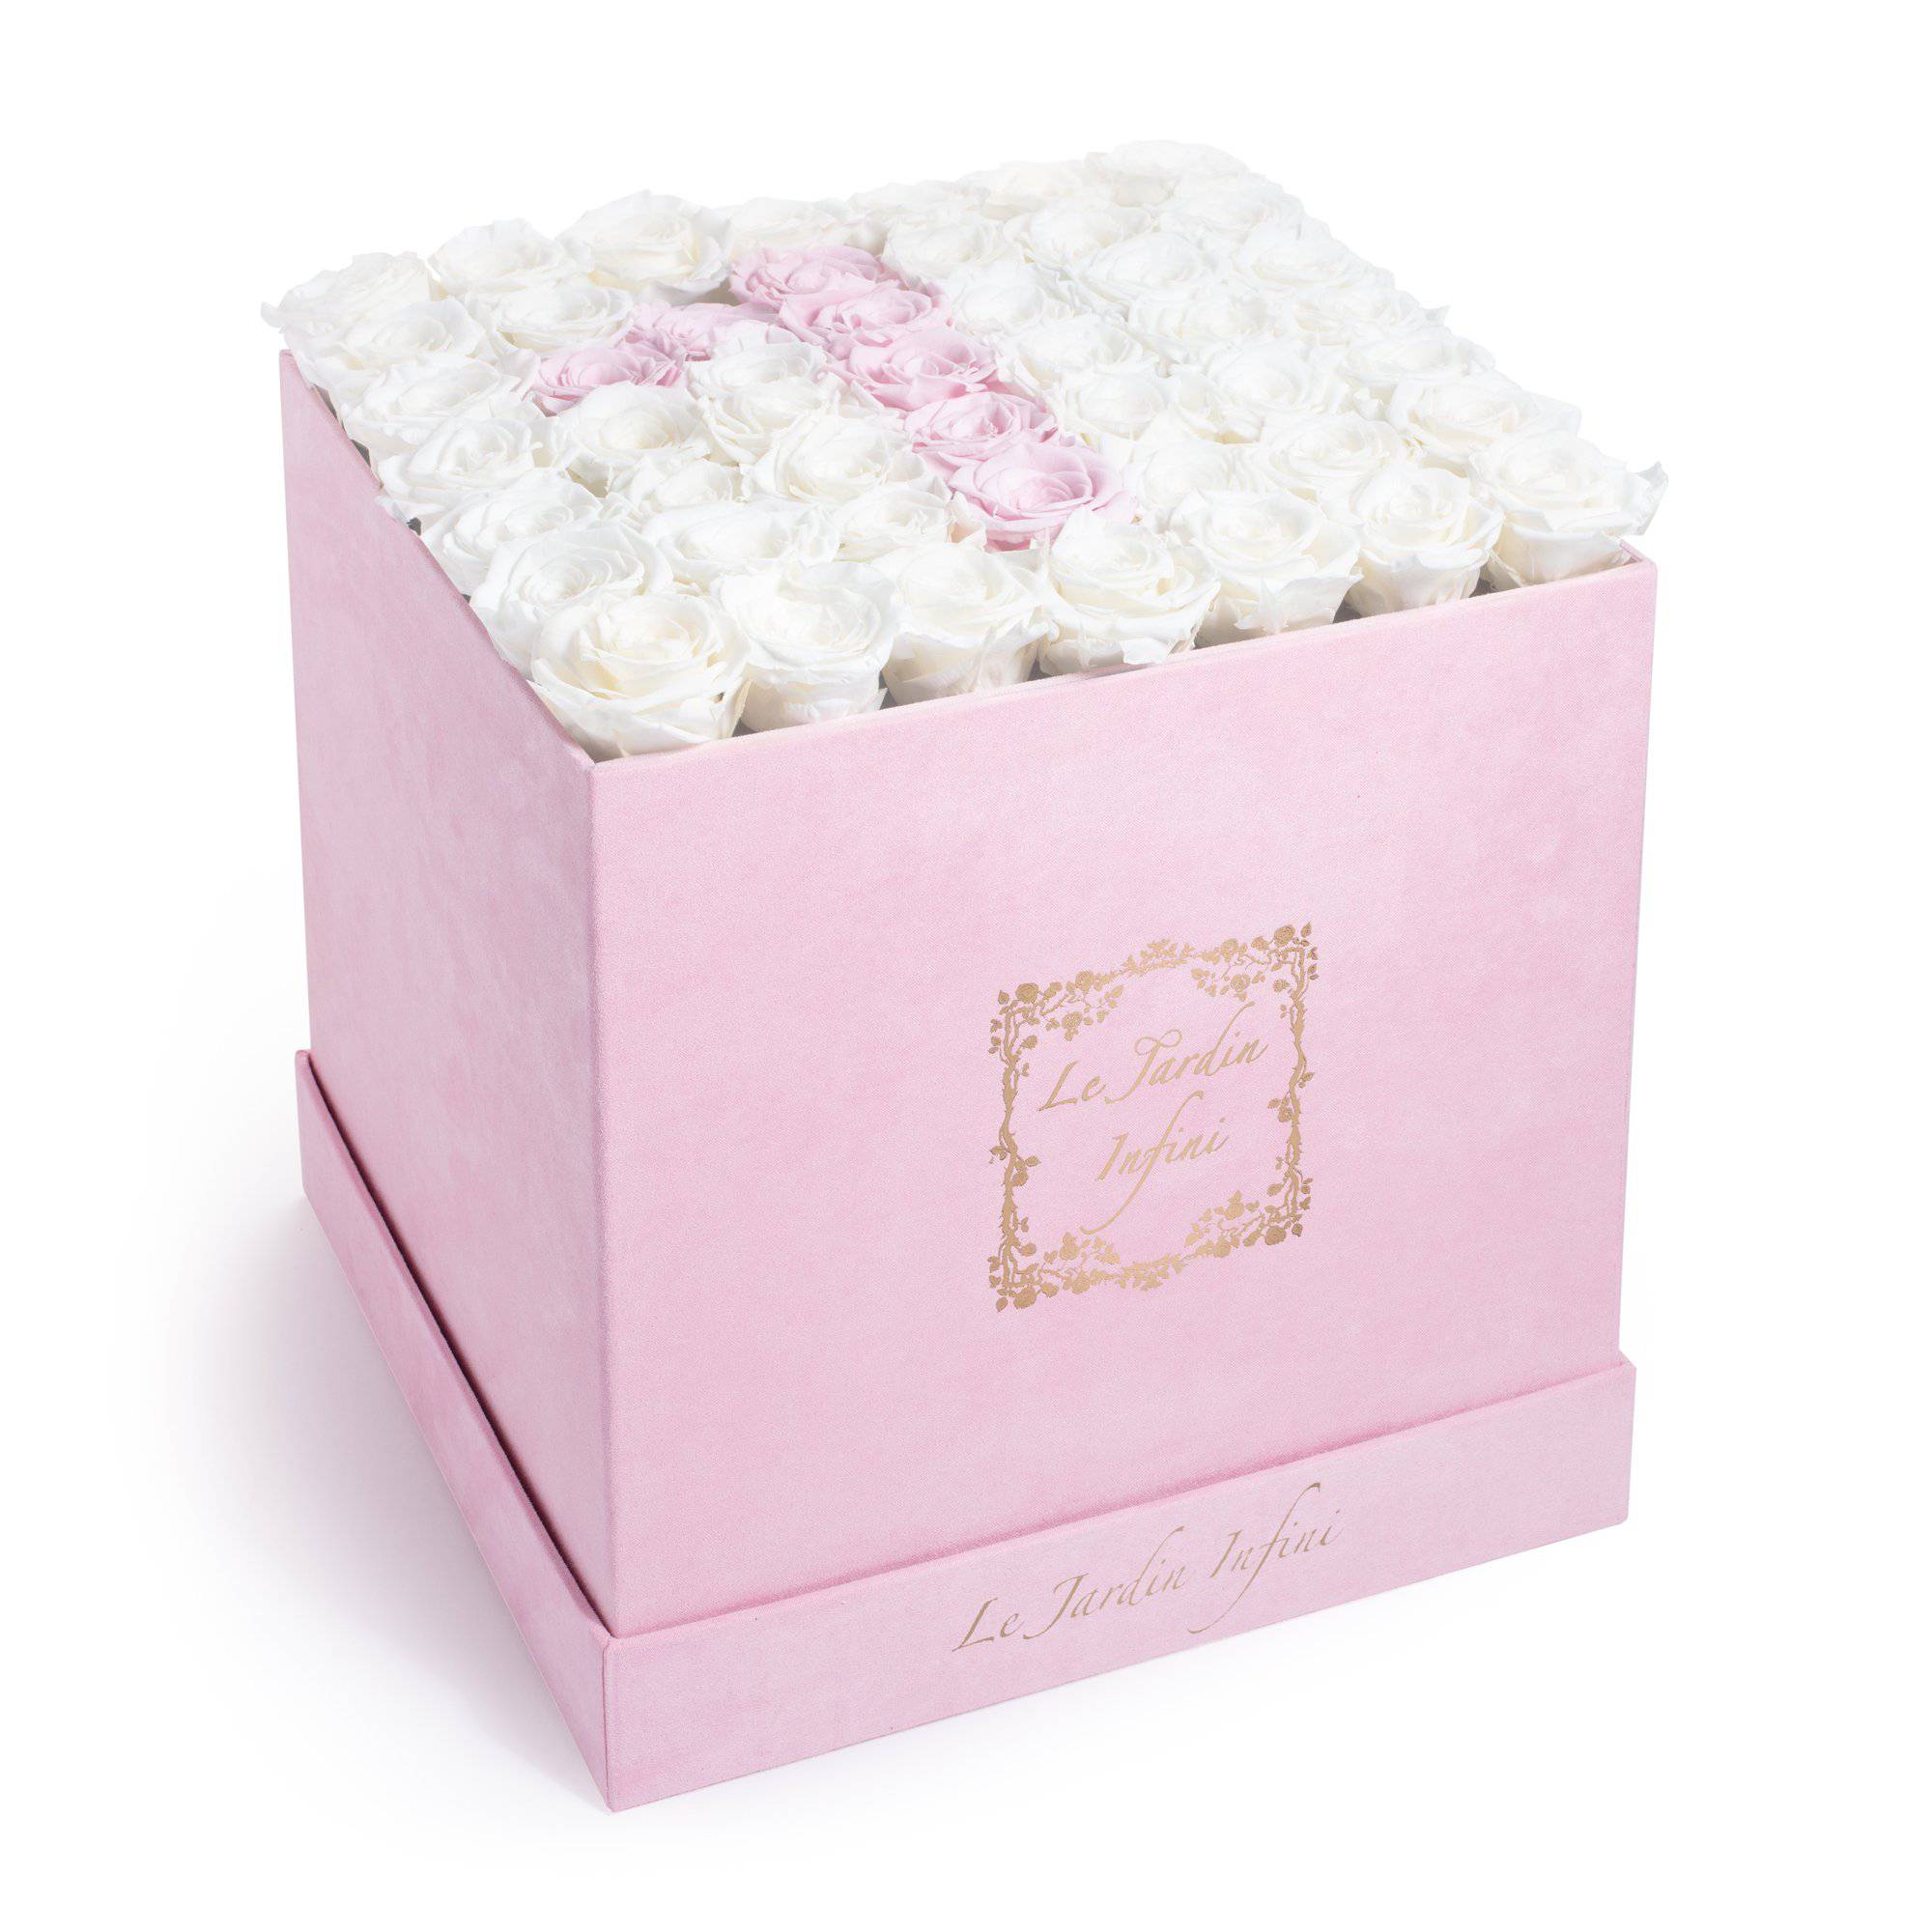 #1 Soft Pink & White Preserved Roses - Large Square Luxury Pink Suede Box